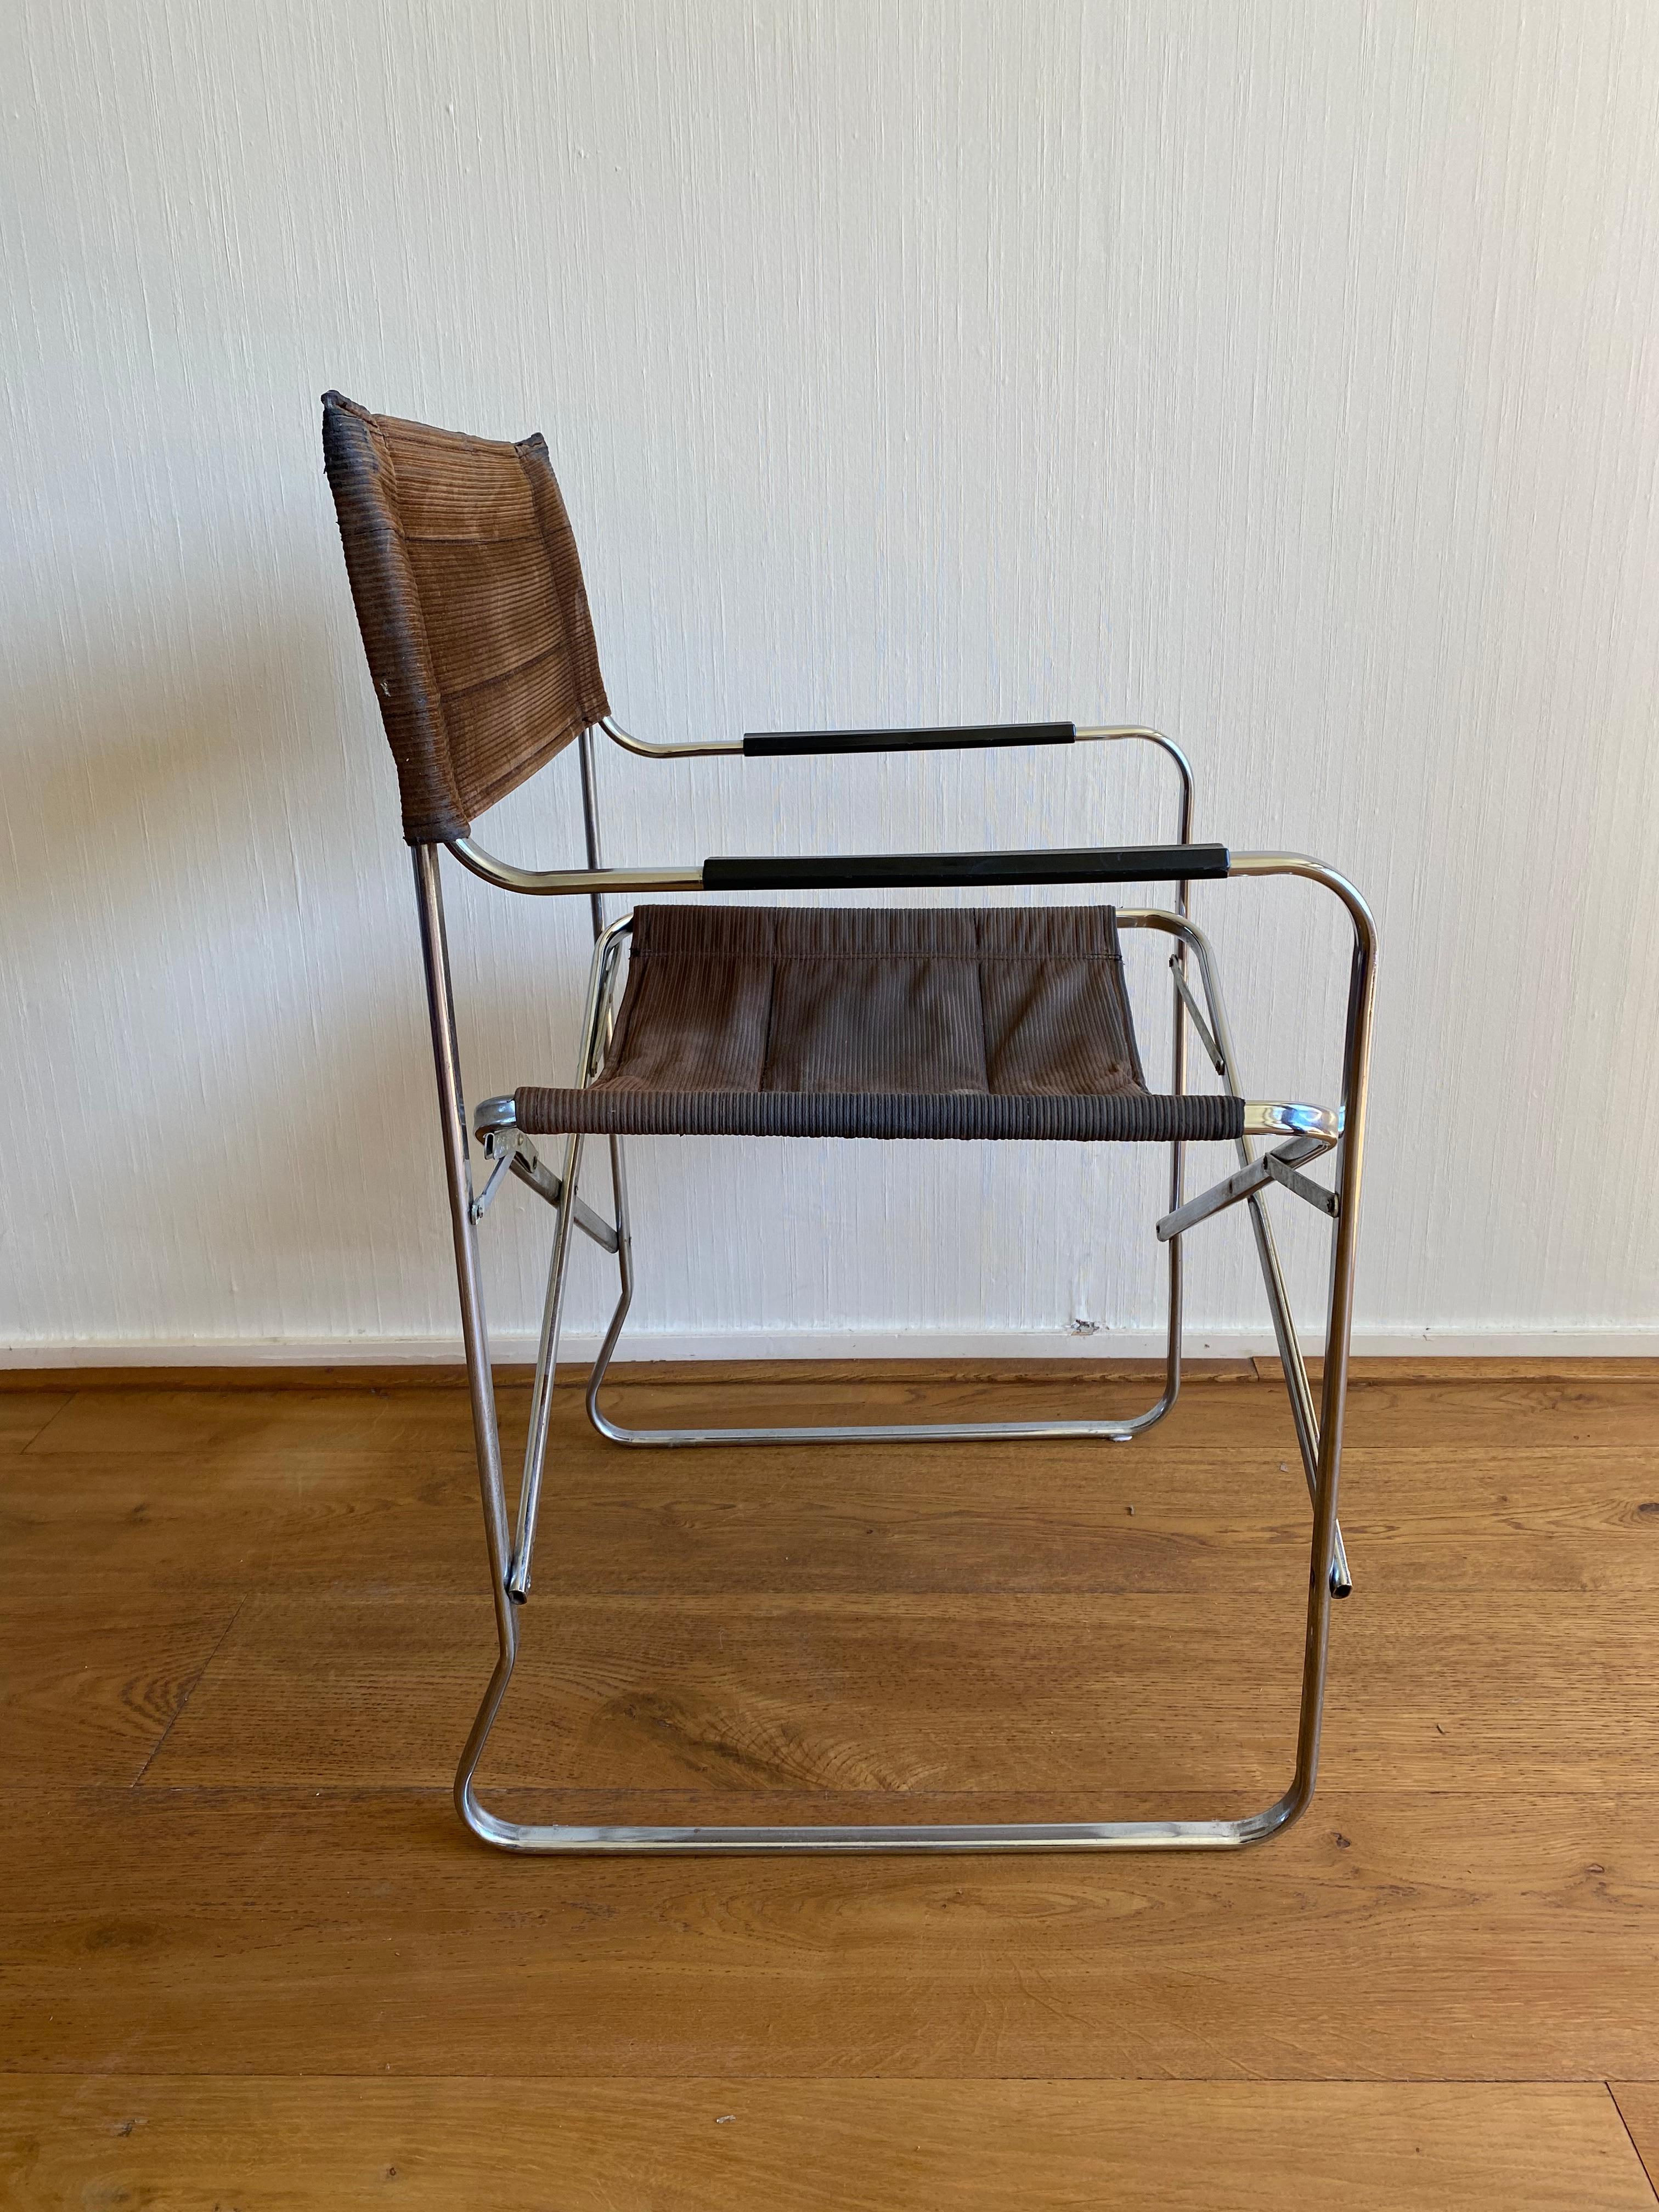 Mid-Century Modern Italian Folding Chair in Style of the Gae Aulenti April Chair For Sale 3